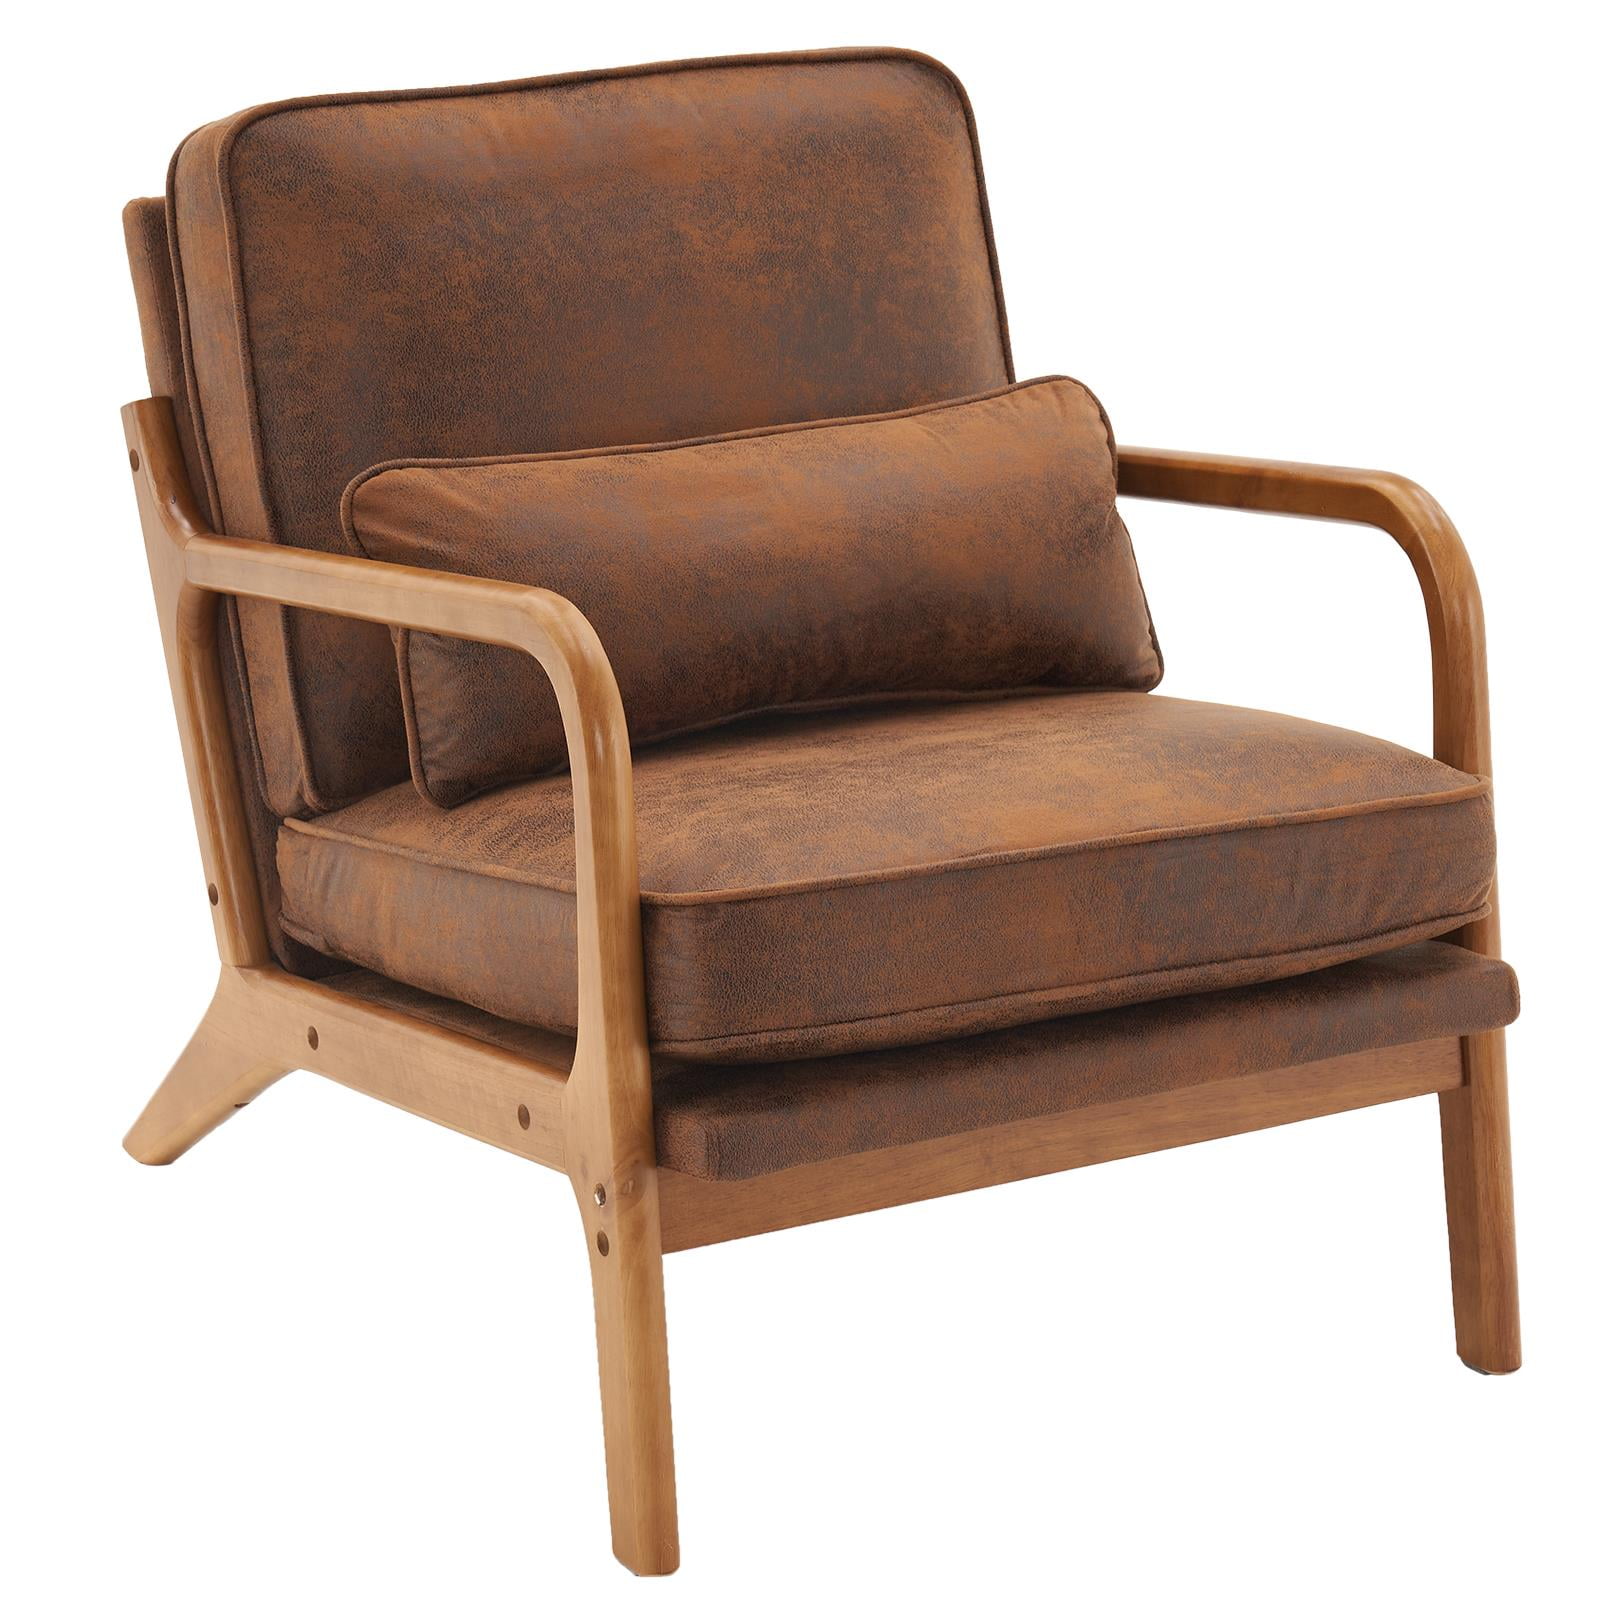 UBesGoo Modern Wood Club Chair Reading Wood Fabric Frame Brown Cloth Solid with Bronzing Chair Upholstered Accent